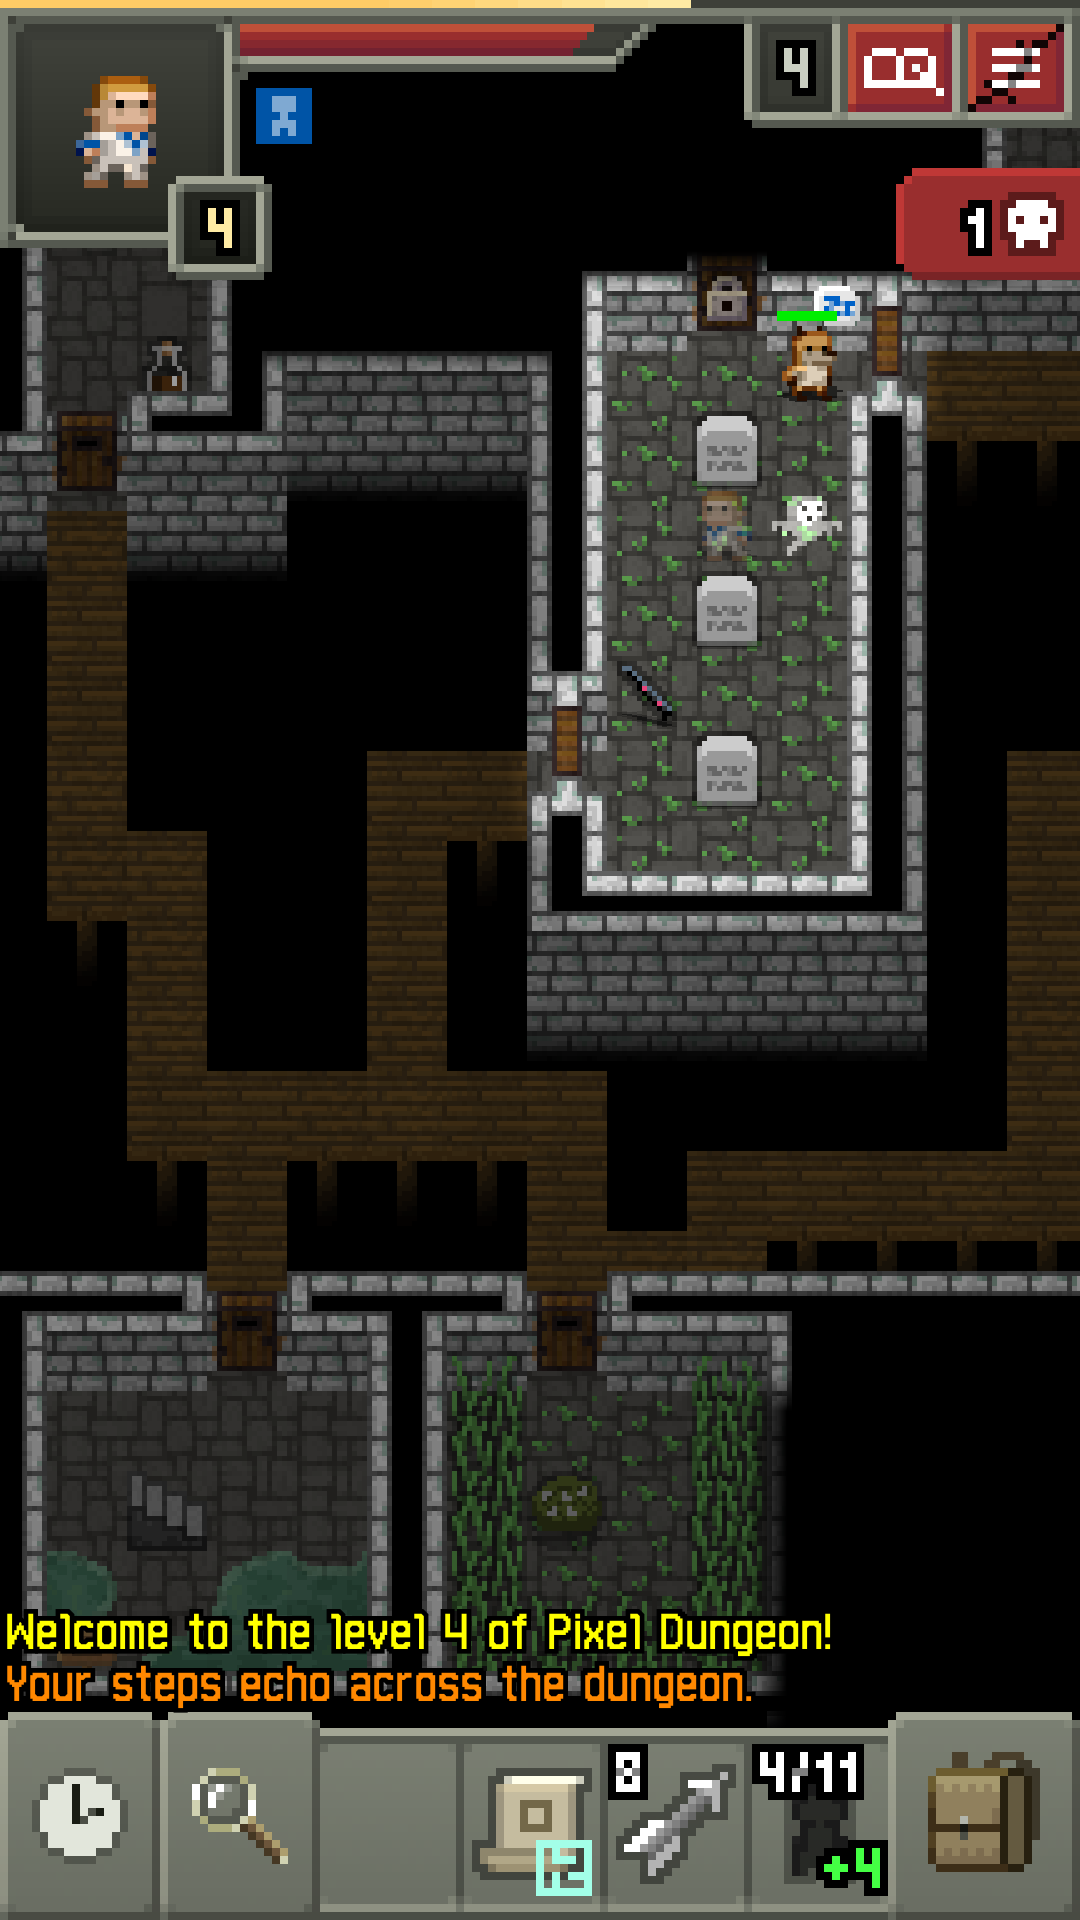 shattered pixel dungeon weapons